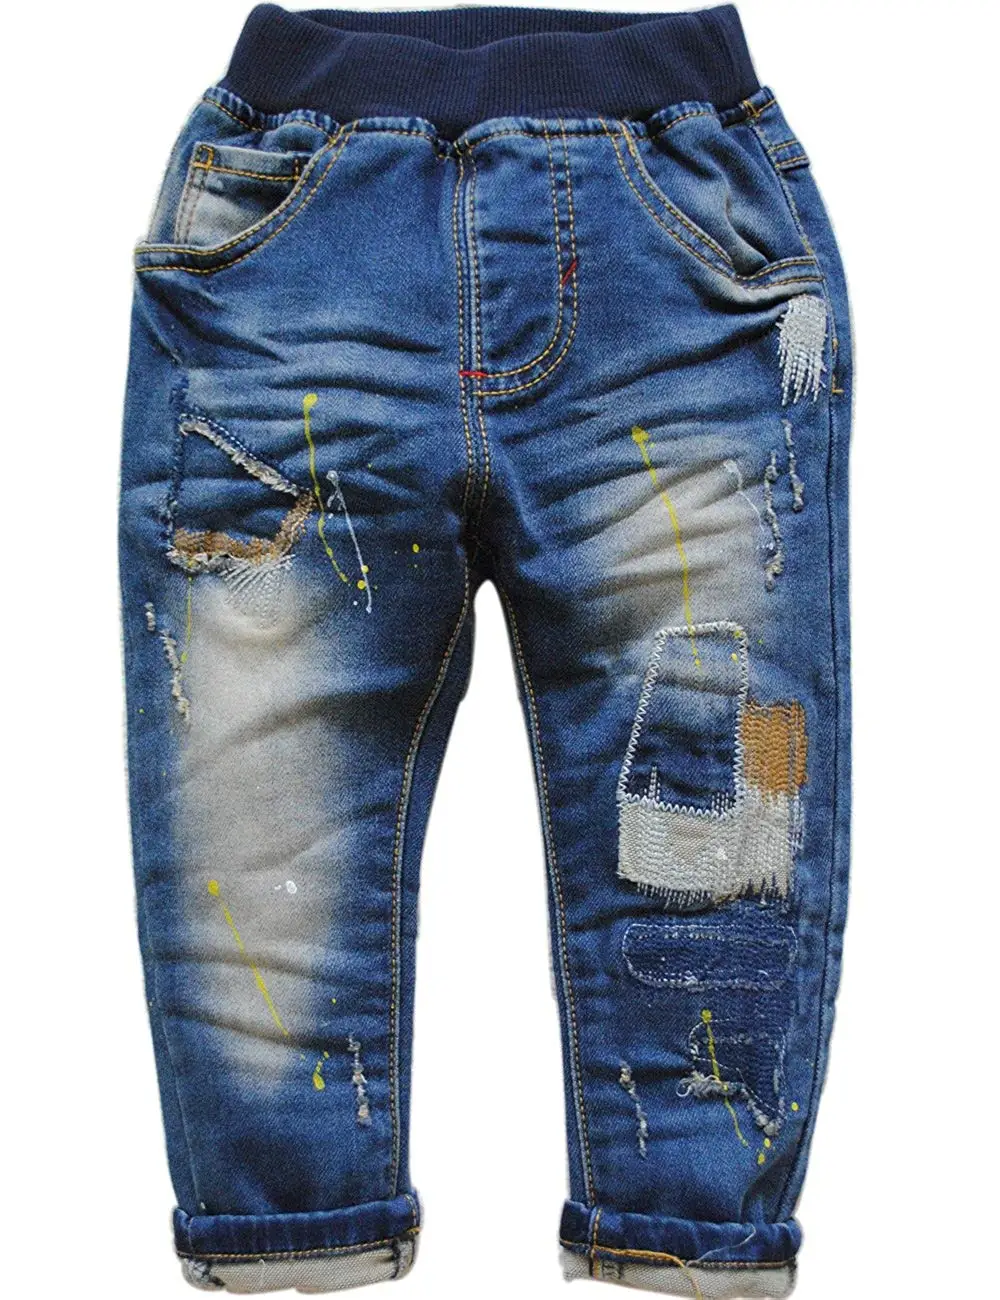 american eagle distressed skinny jeans